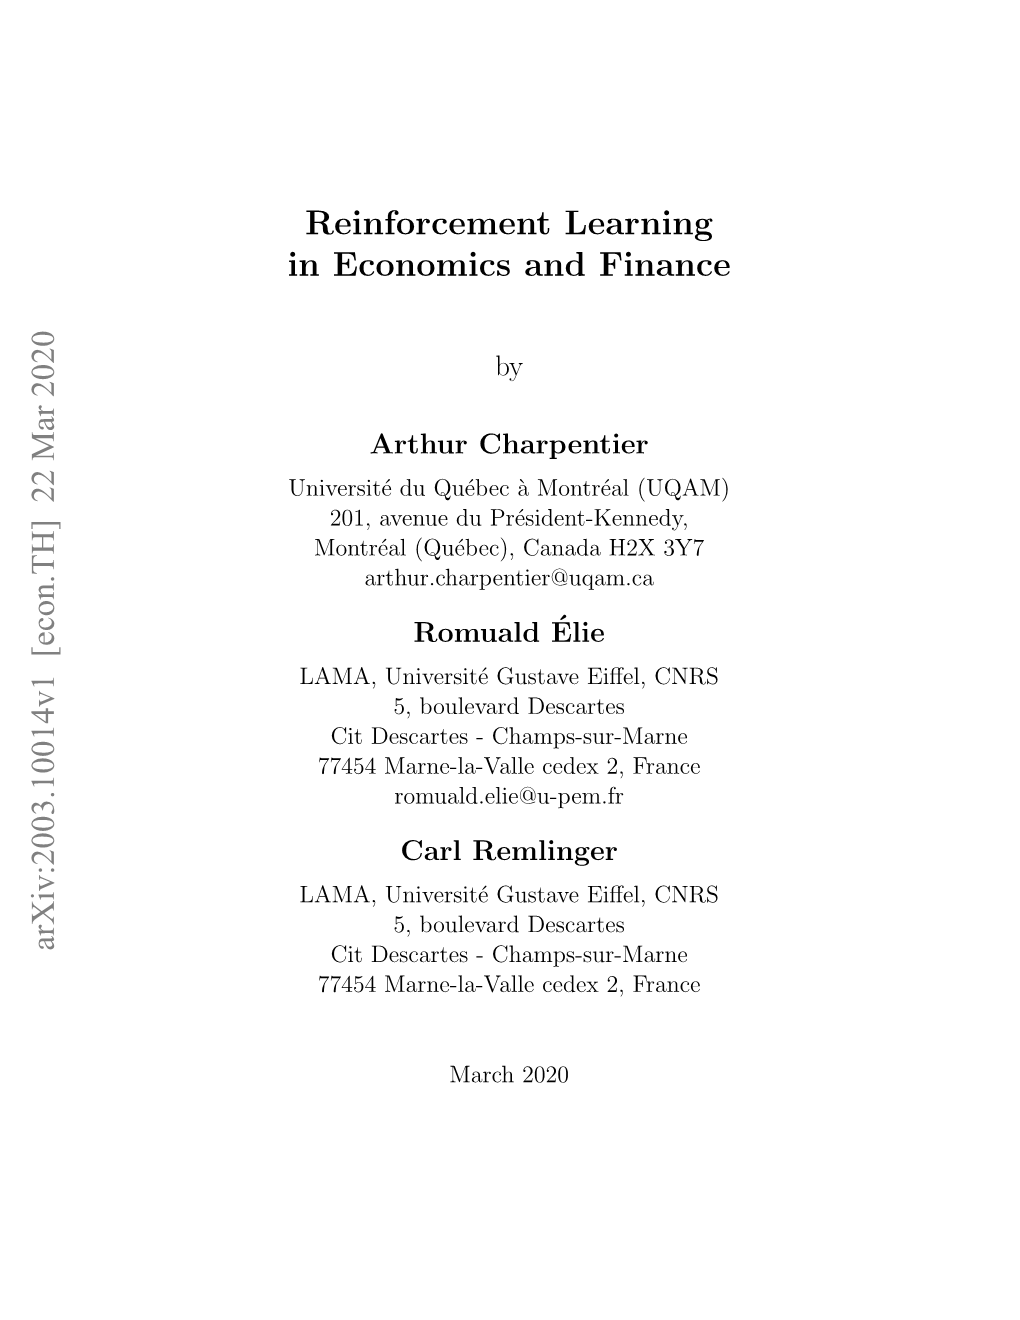 Reinforcement Learning in Economics and Finance Arxiv:2003.10014V1 [Econ.TH] 22 Mar 2020